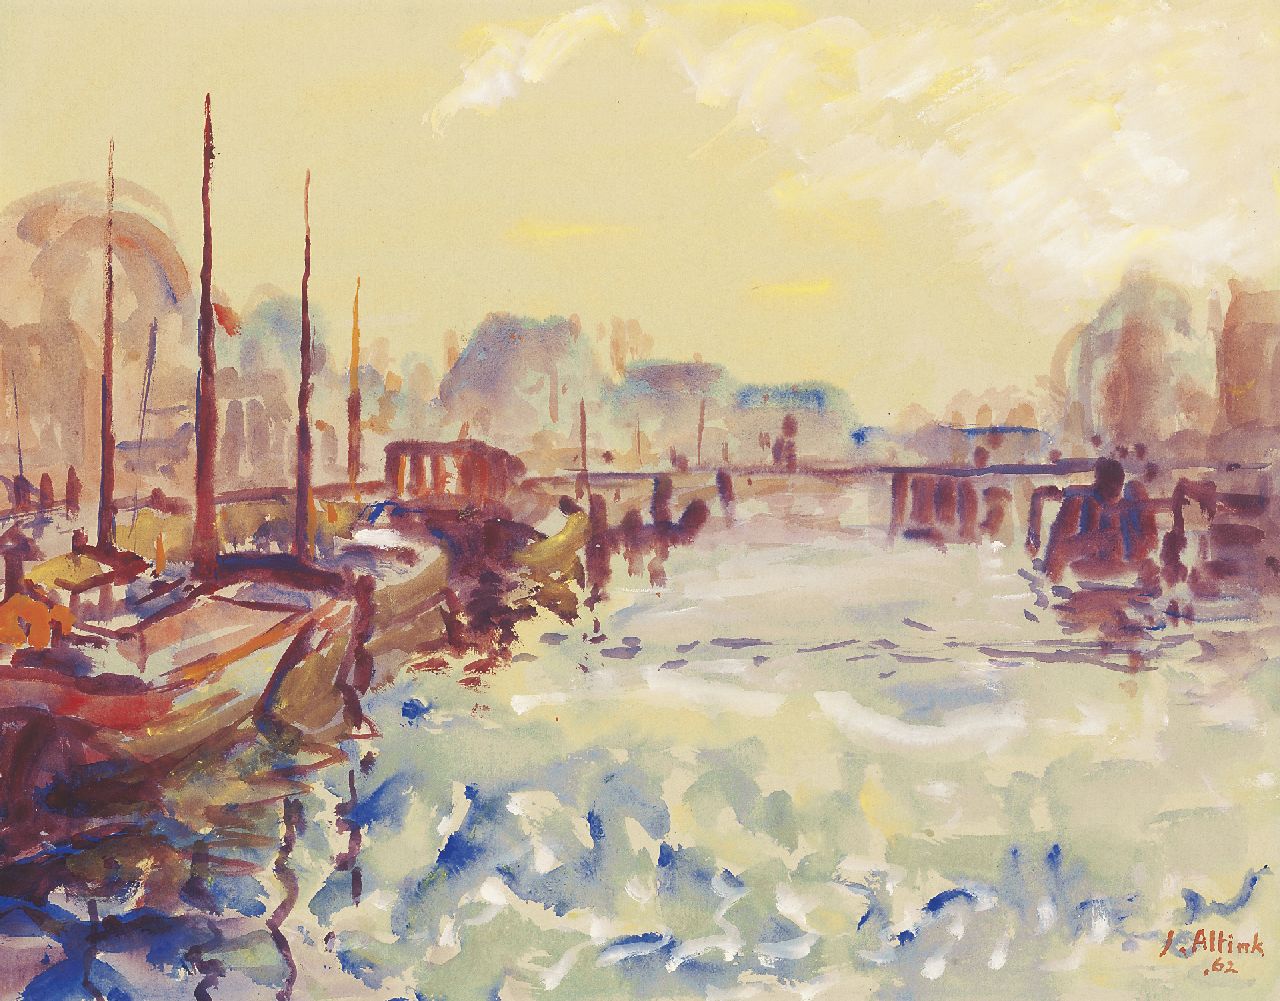 Altink J.  | Jan Altink, The Verbindingskanaal in Groningen, tempera on paper 47.5 x 61.5 cm, signed l.r. and dated '62